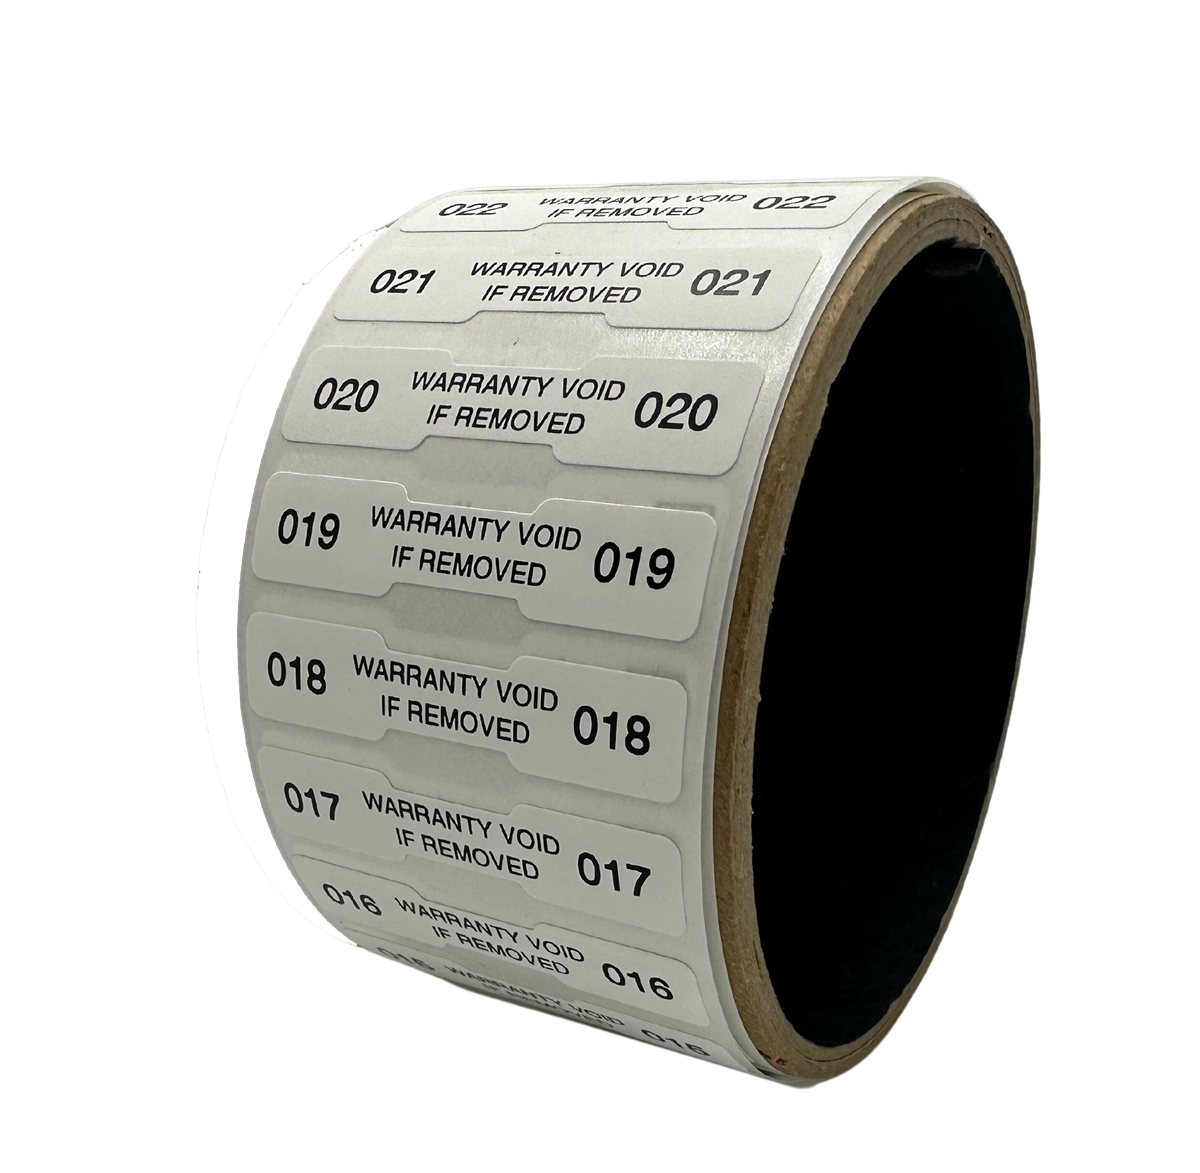 2,000 TamperVoidPro® White Tamper Evident Security Labels Seal Sticker, Dogbone Shape Size 1.75" x 0.375 (44mm x 9mm). Printed: Warranty Void if Label Removed + Serialization.